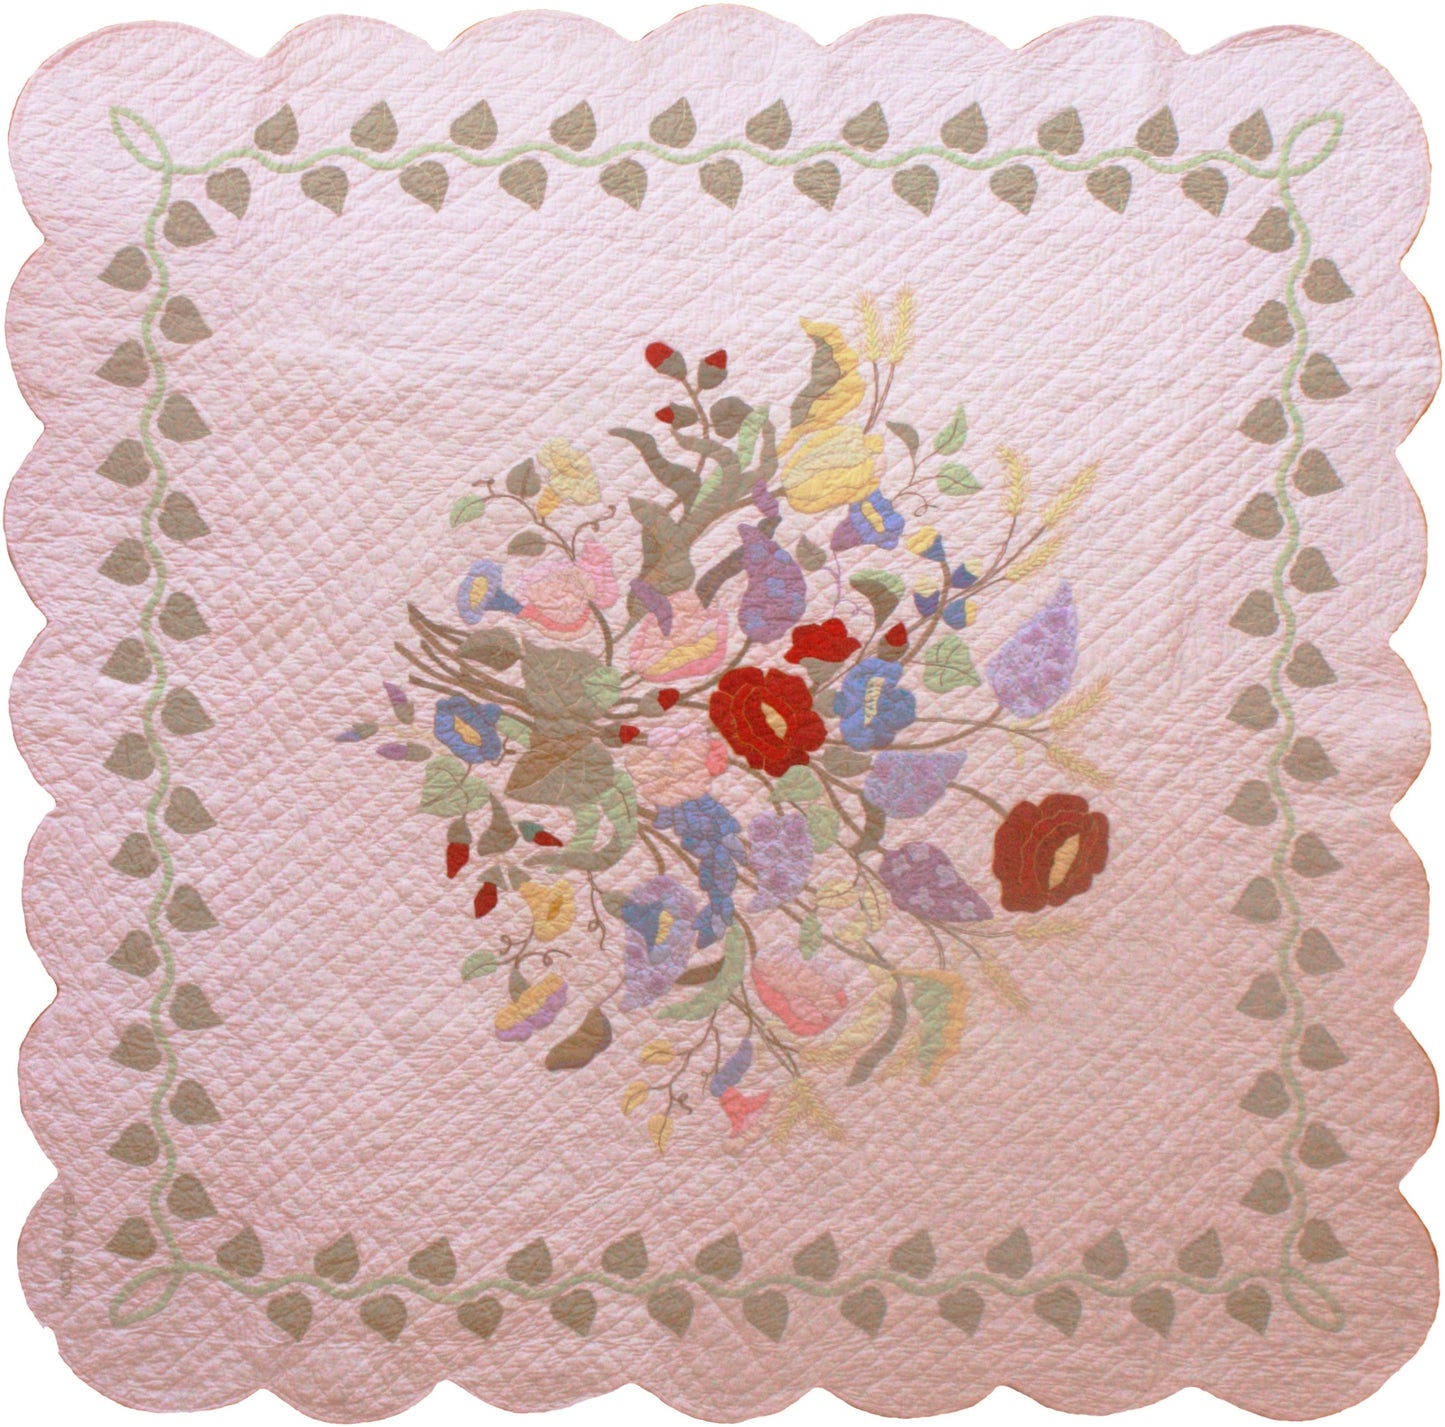 "Summertime" in Rose Cover-Up Quilt 62" x 62"